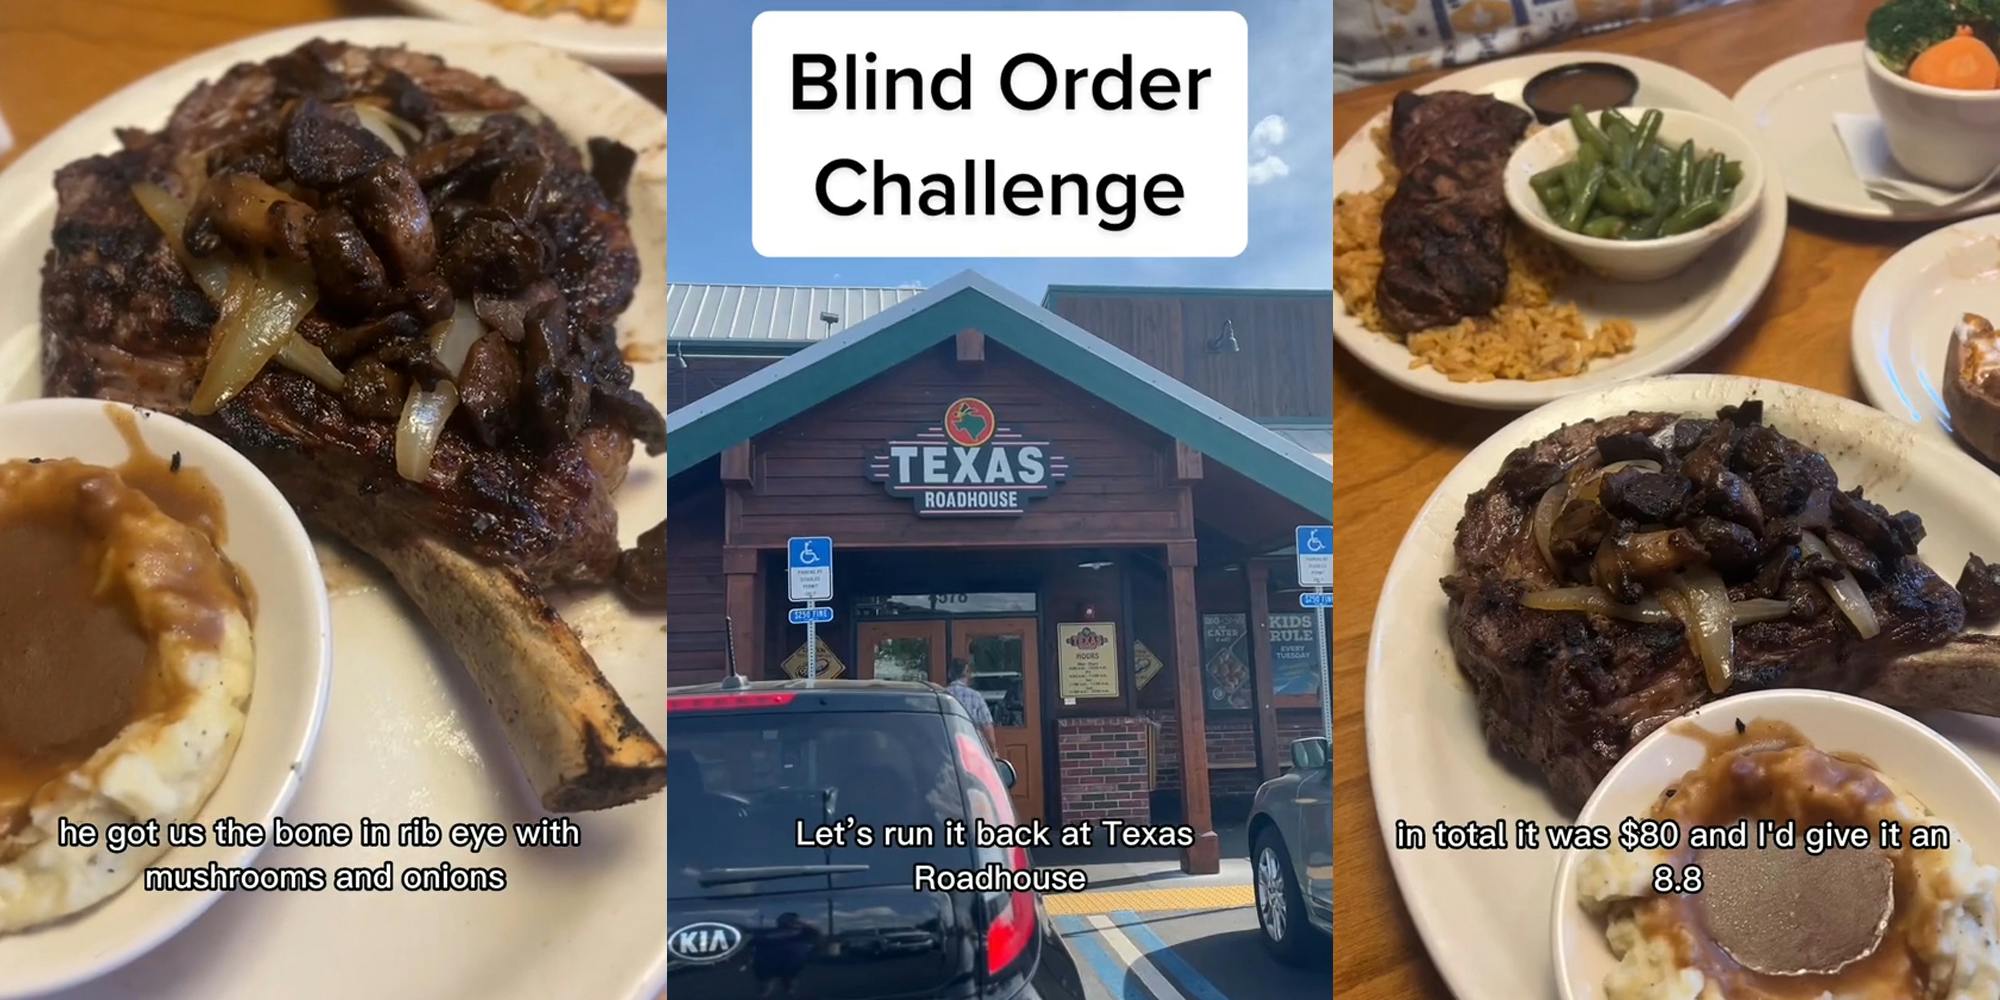 Texas Roadhouse bone in rib eye with caption "he got us the bone in rib eye with mushrooms and onions" (l) Texas Roadhouse building with sign and caption "Blind Order Challenge let's run it back at Texas Roadhouse" (c) Texas Roadhouse food with caption "in total it was $80 and I'd give it an 8.8" (r)